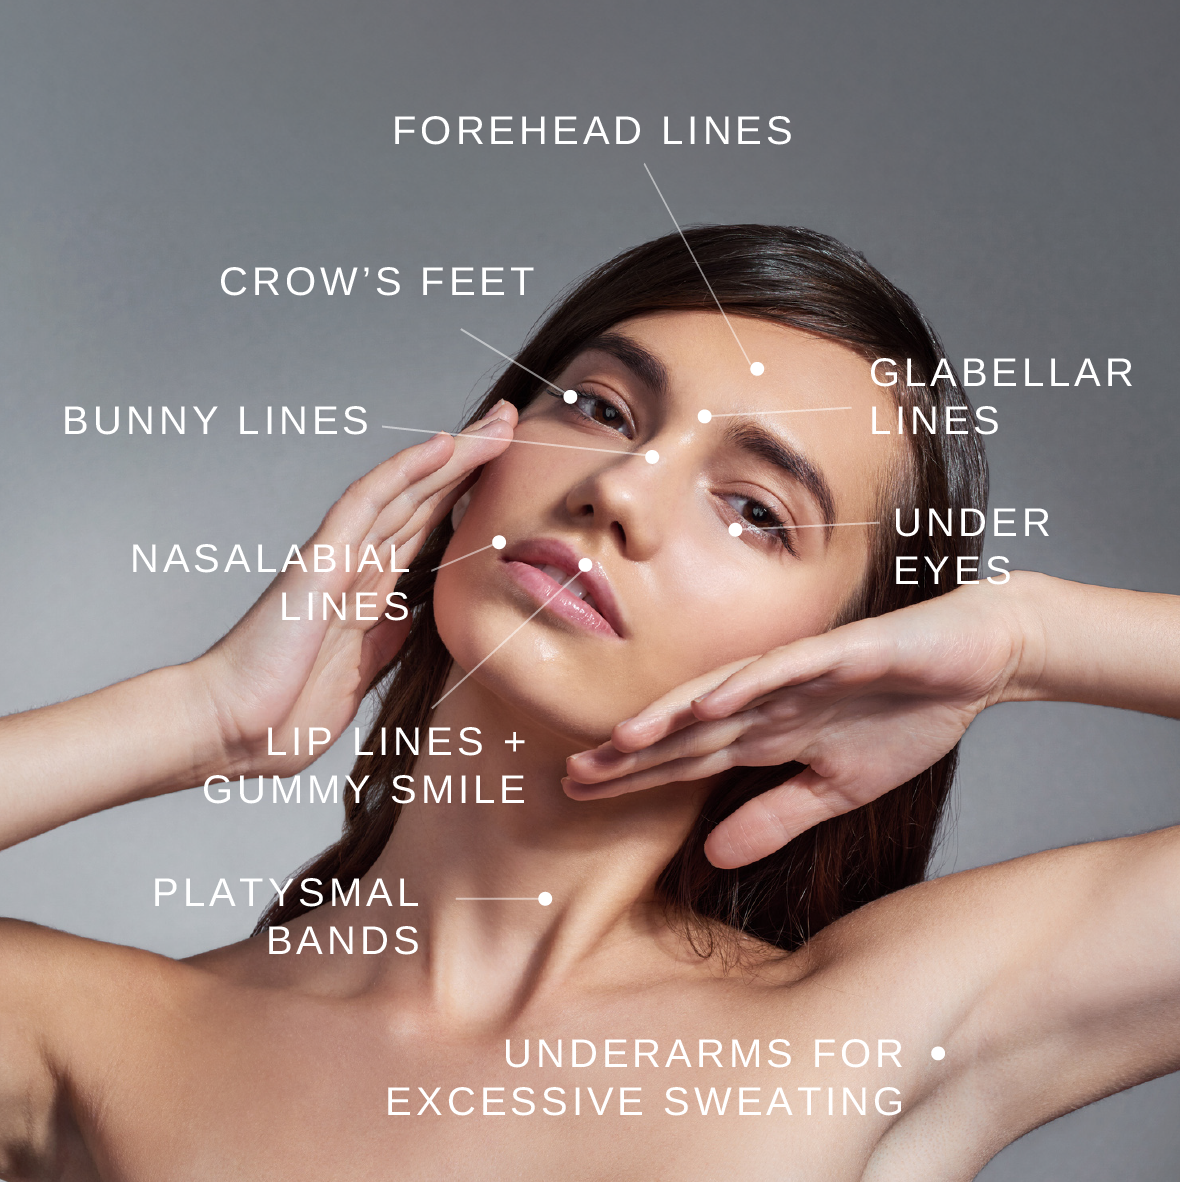 This illustrates the areas that Holos Medical Spa can treat with botox and neuromodulators.